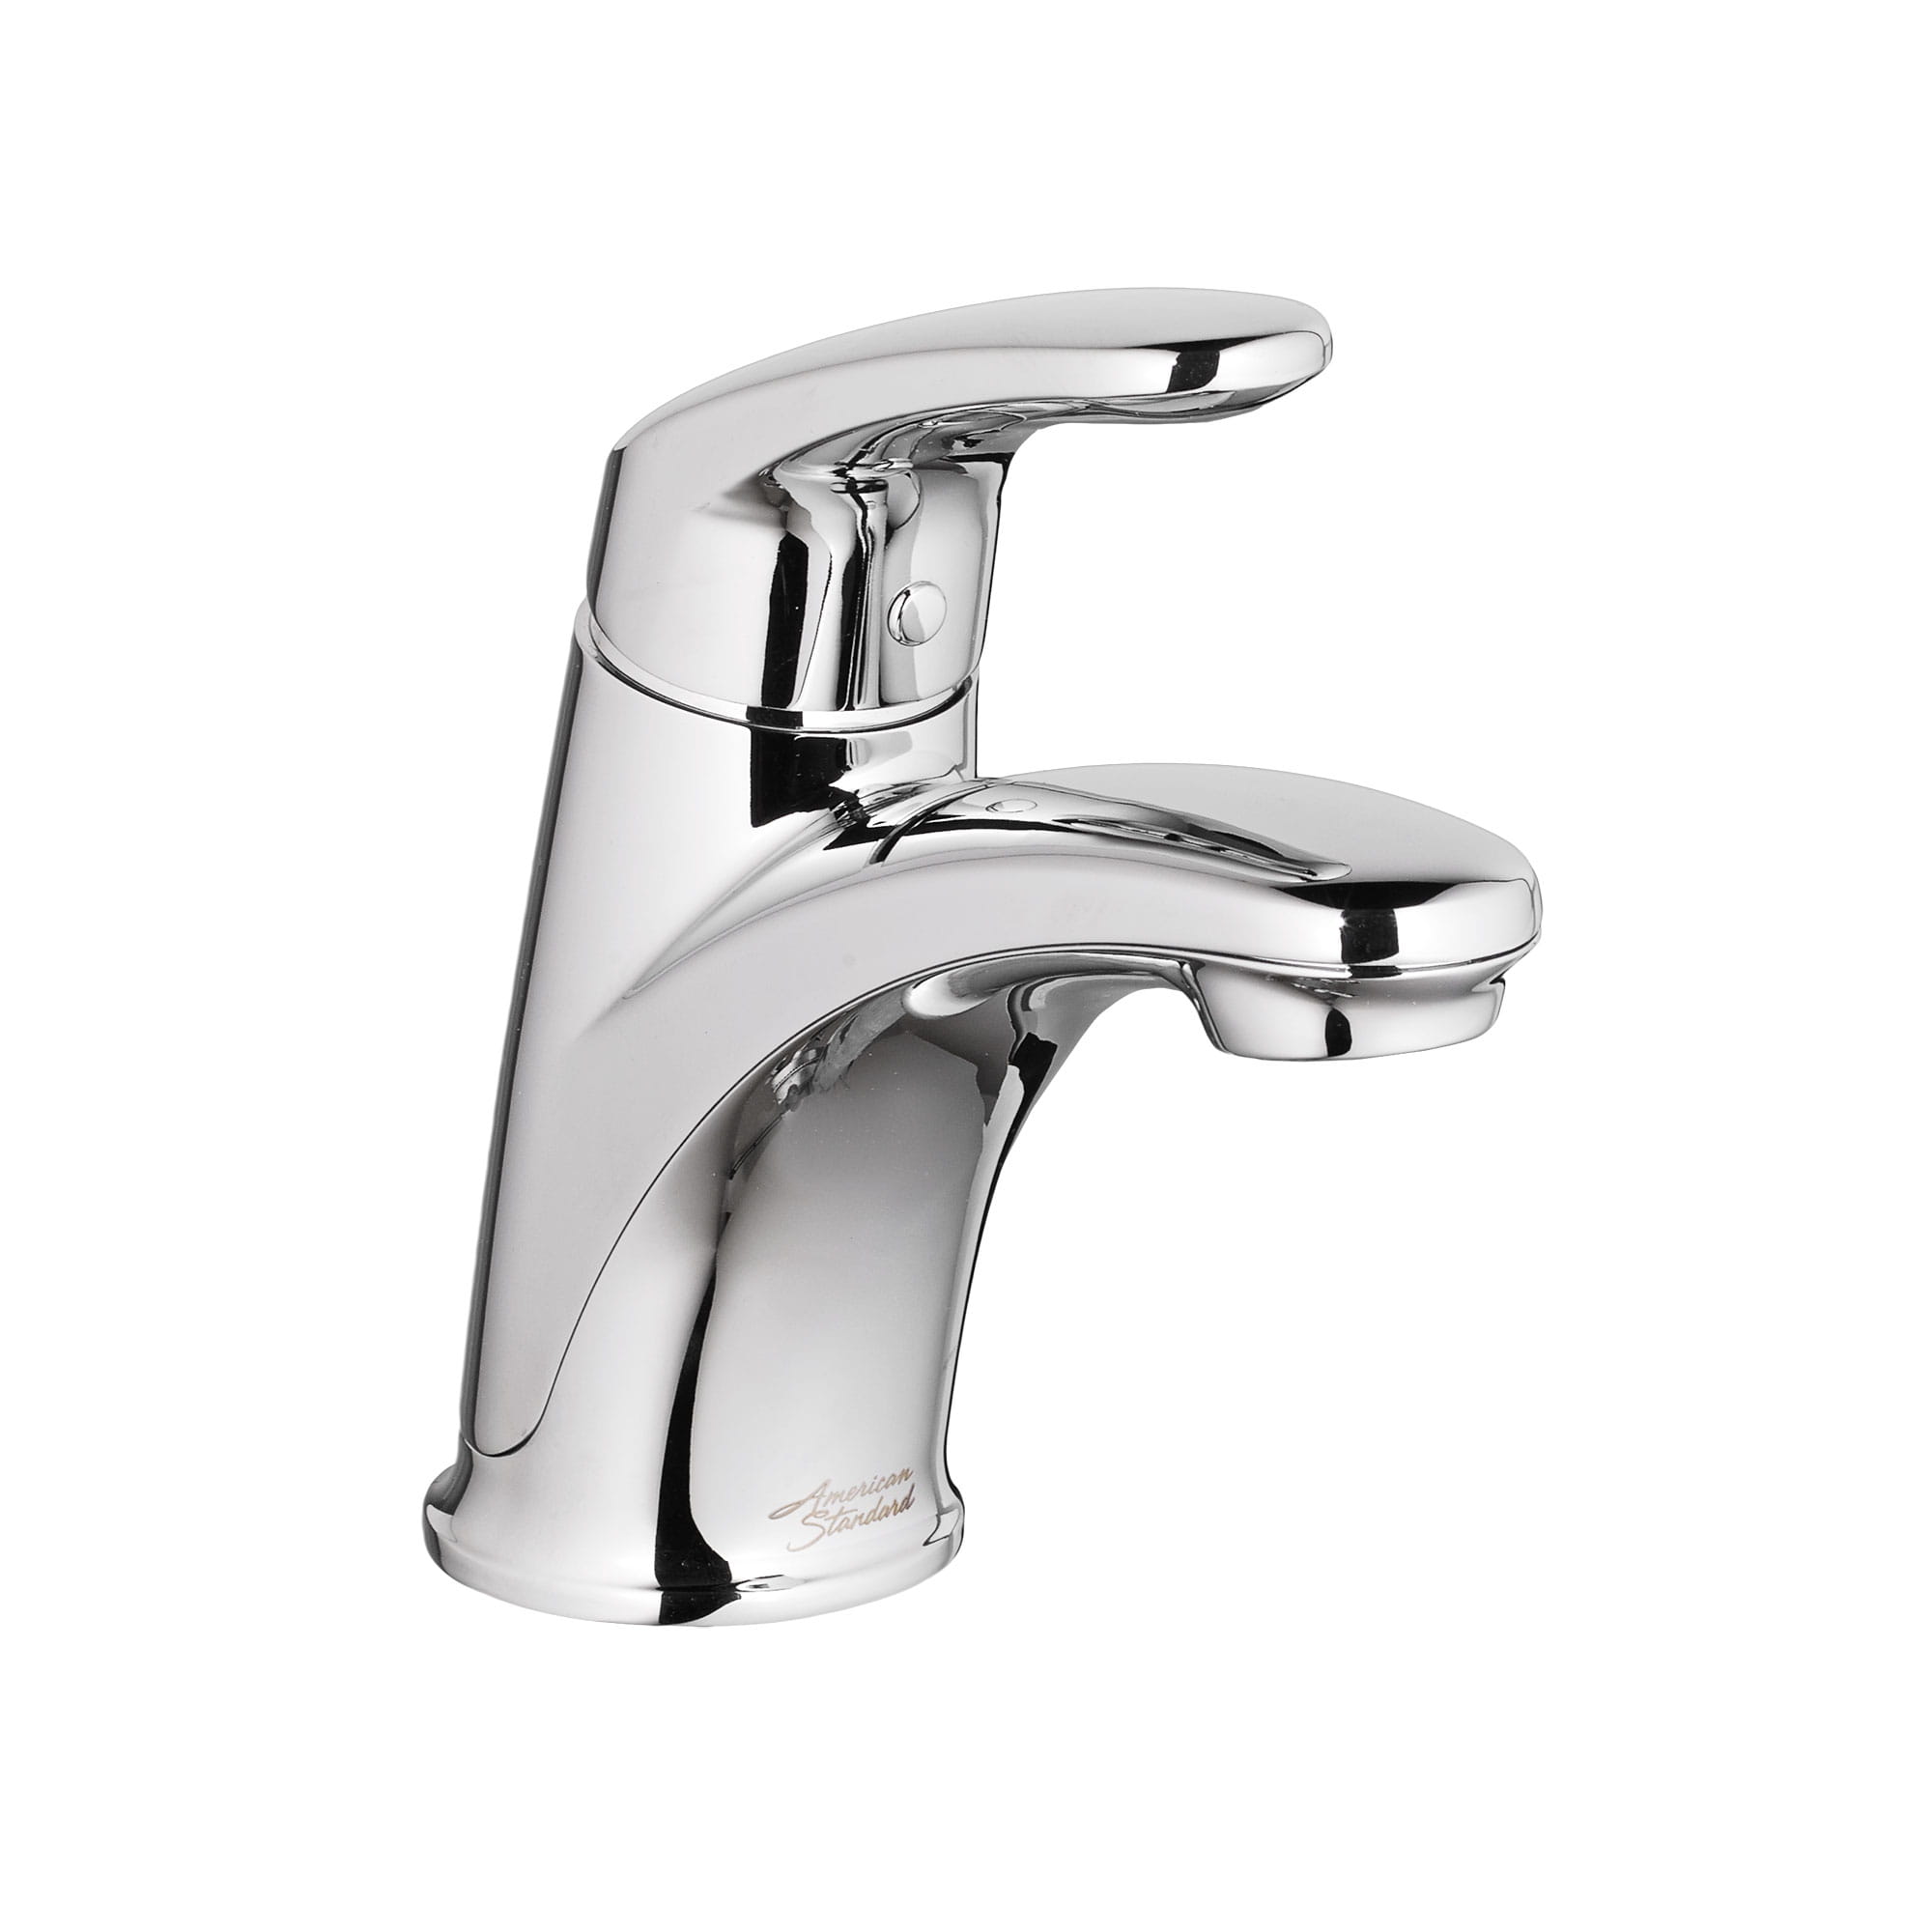 Colony® PRO Single Hole Single-Handle Bathroom Faucet 1.2 gpm/4.5 Lpm Less Drain With Lever Handle